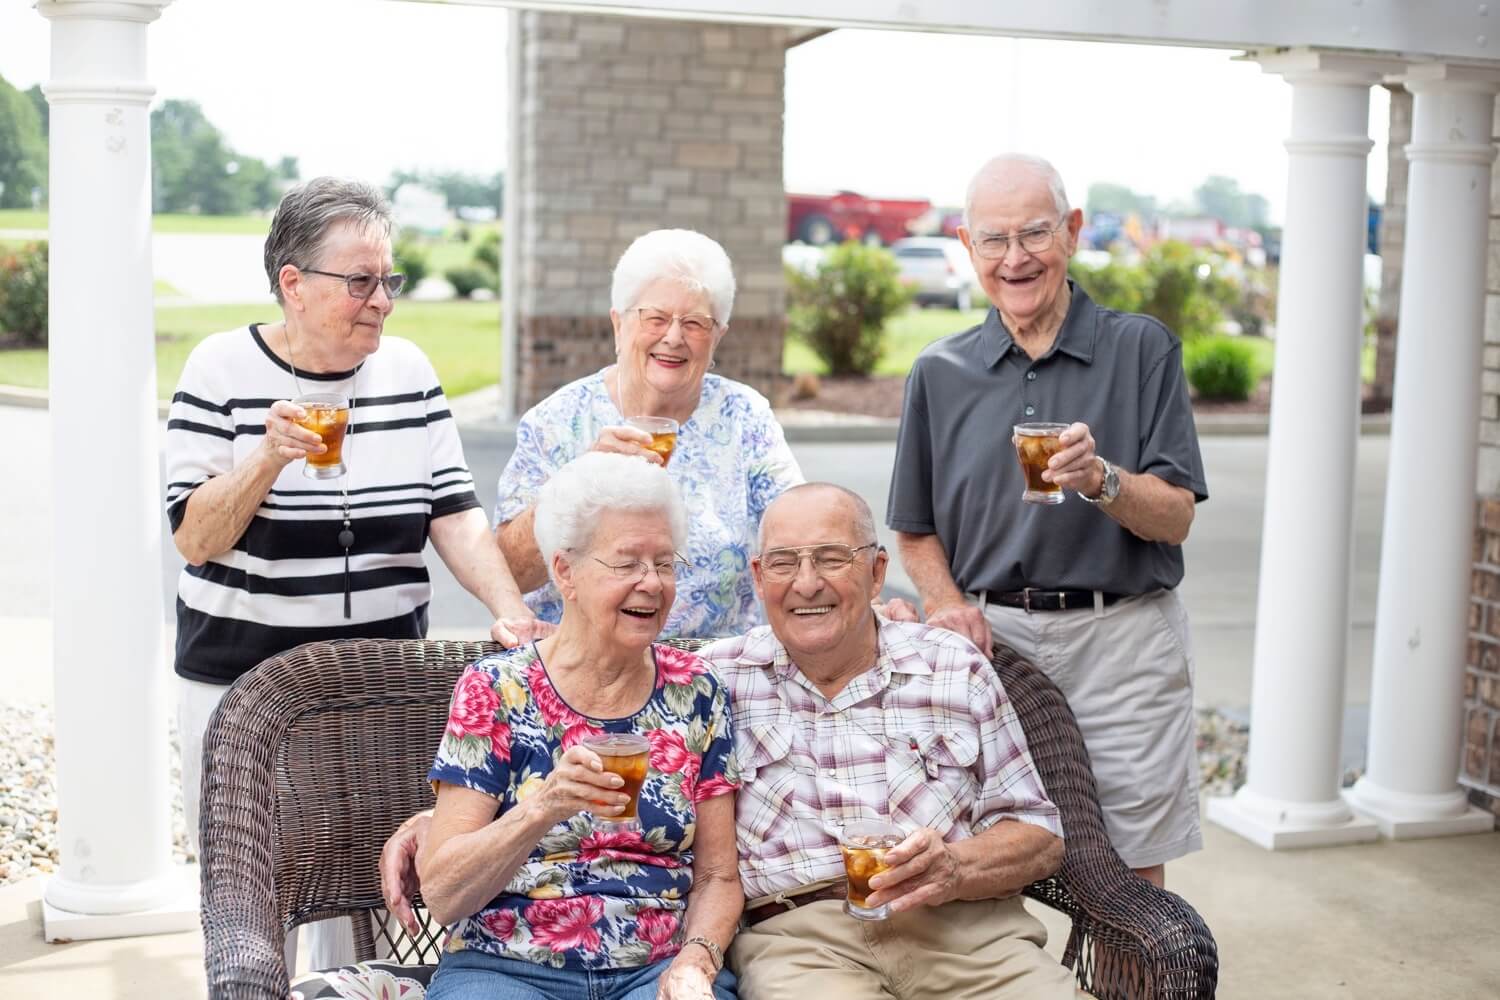 Residents toasting drinks together outside